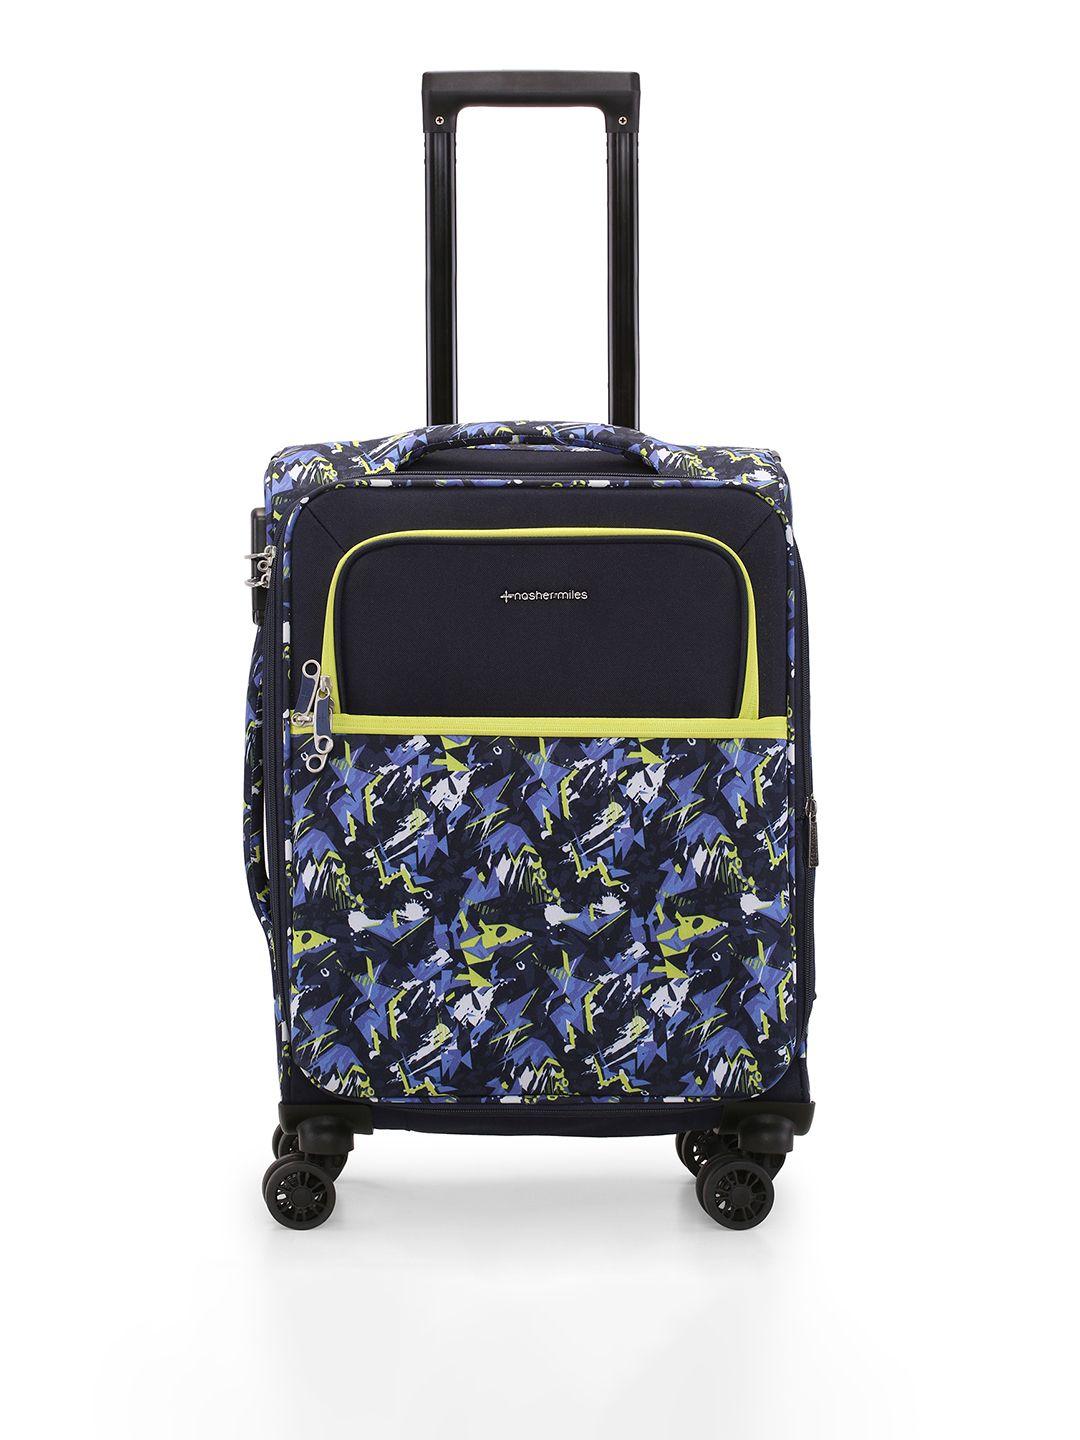 nasher miles unisex water resistant soft-sided cabin trolley suitcase